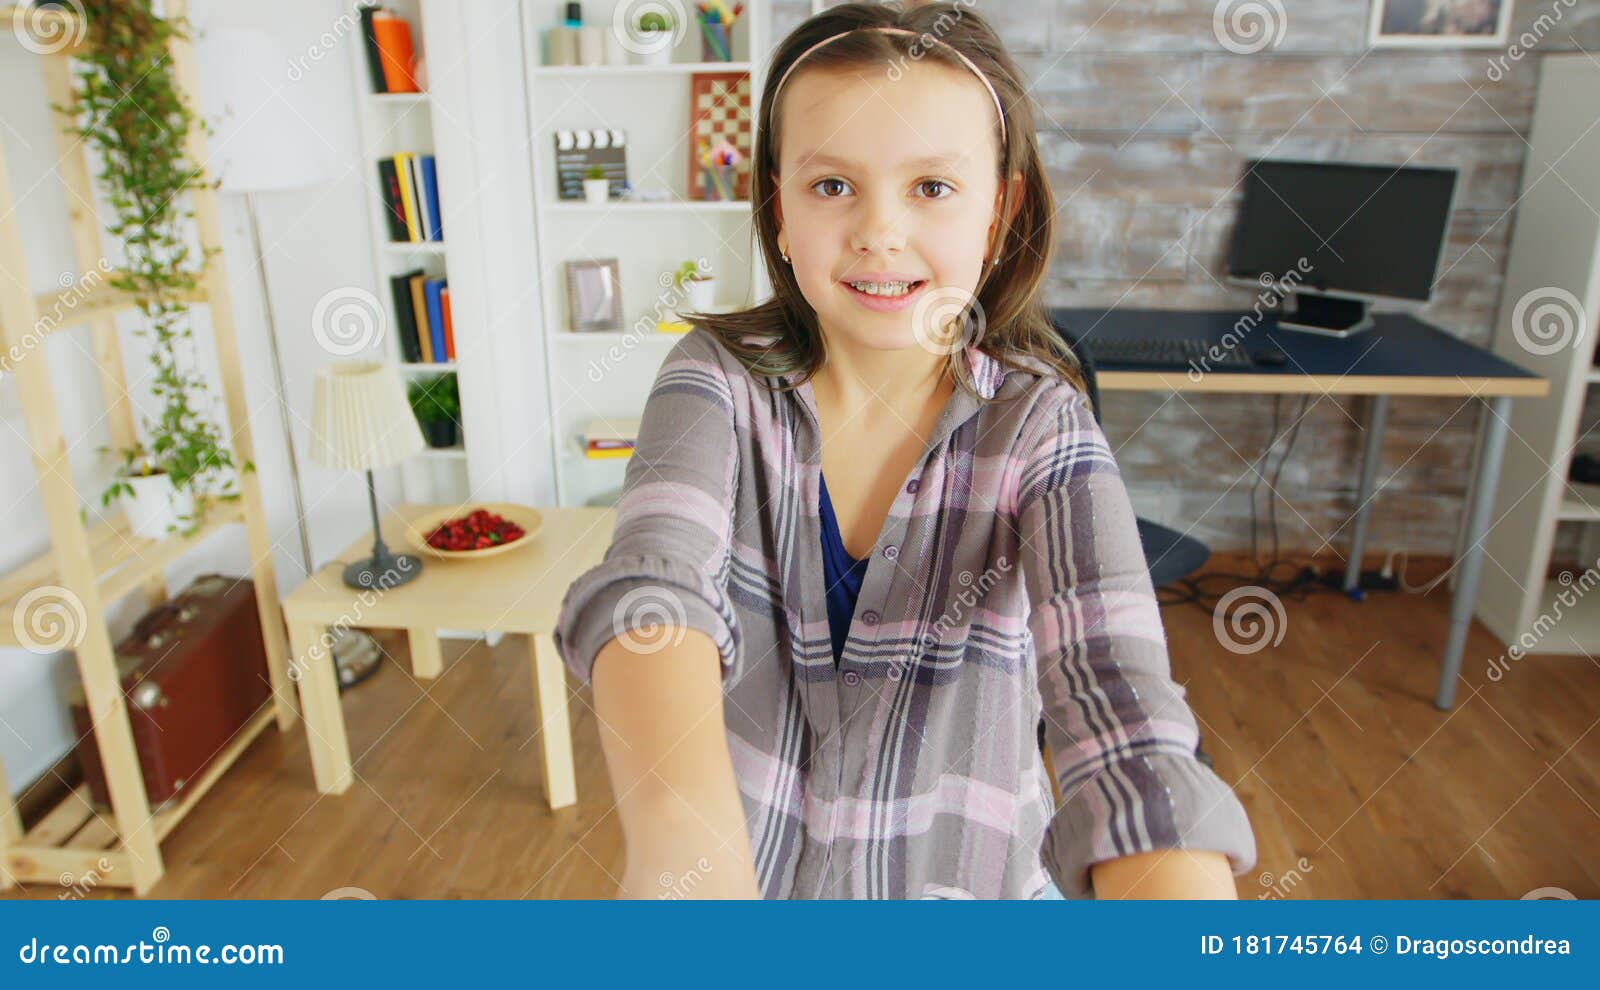 Pov Of Mother And Daughter Jumping Together Stock Photo Image Of